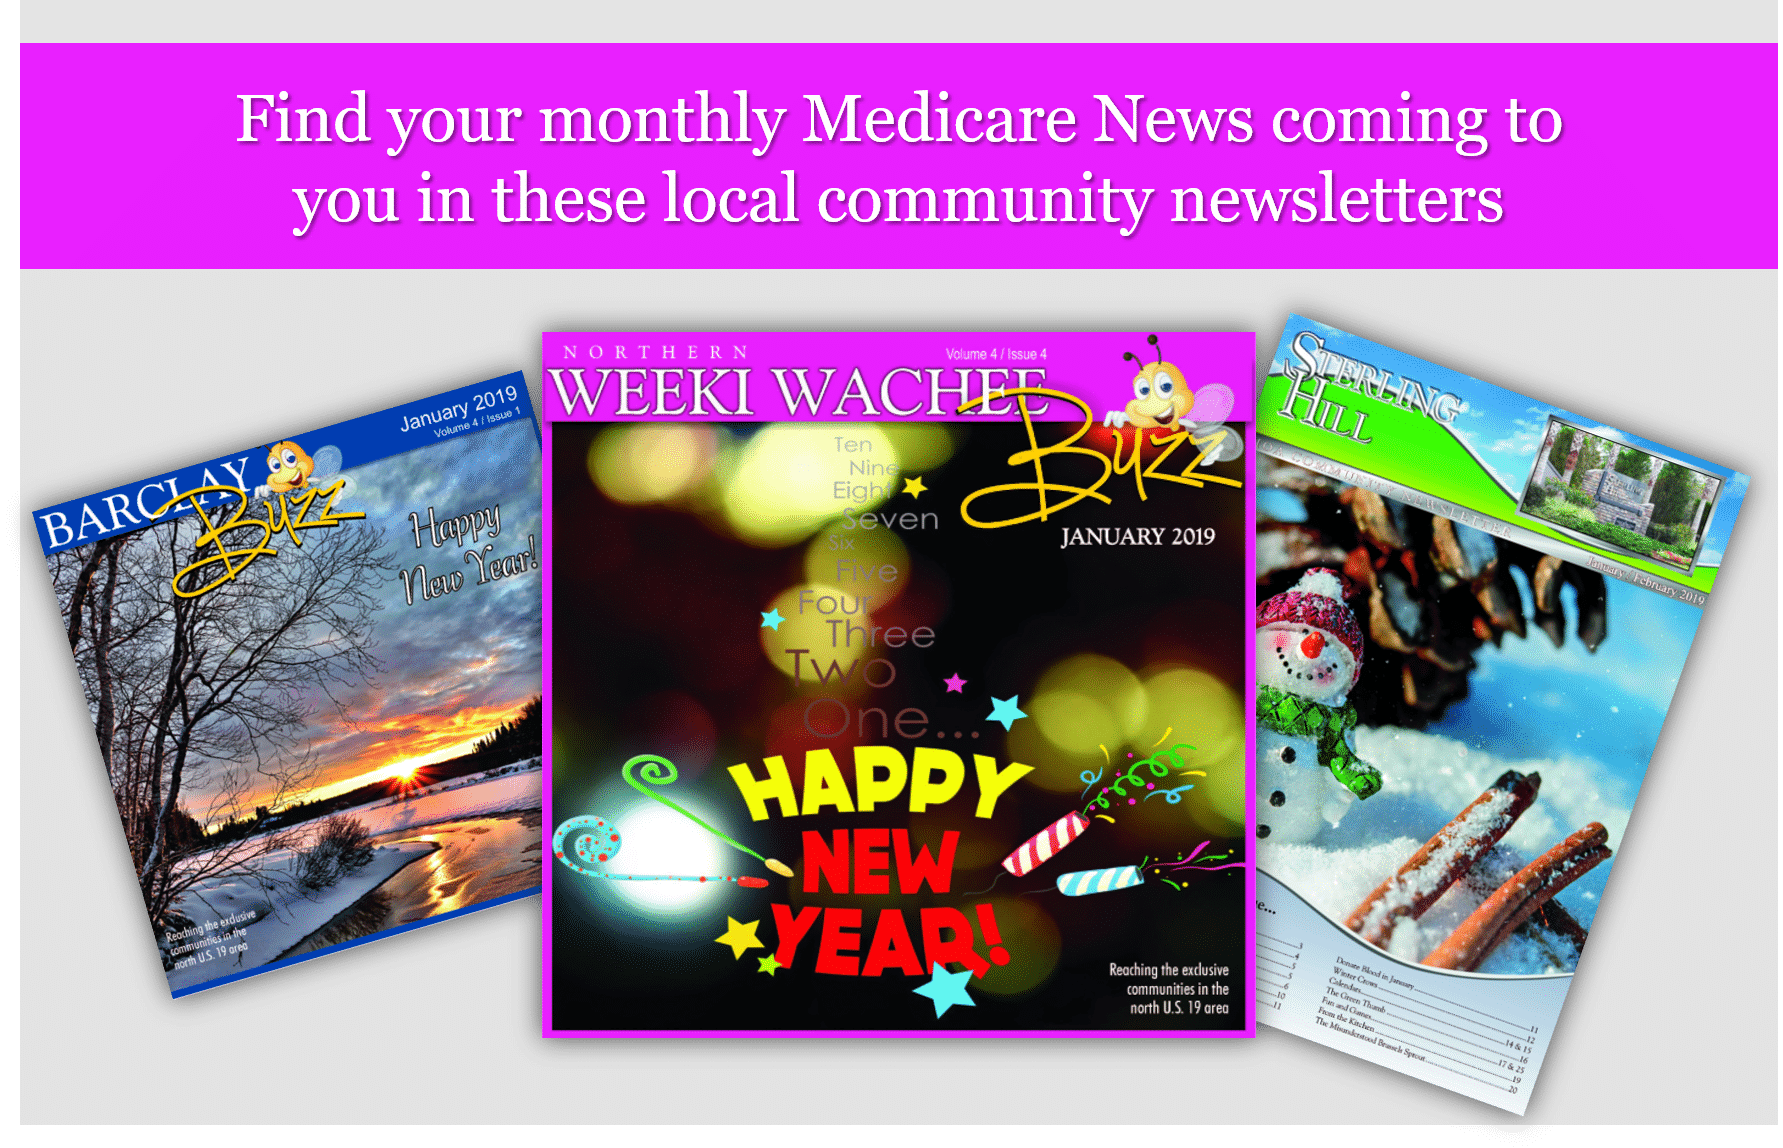 January 2019 Monthly Medicare News & Community Events